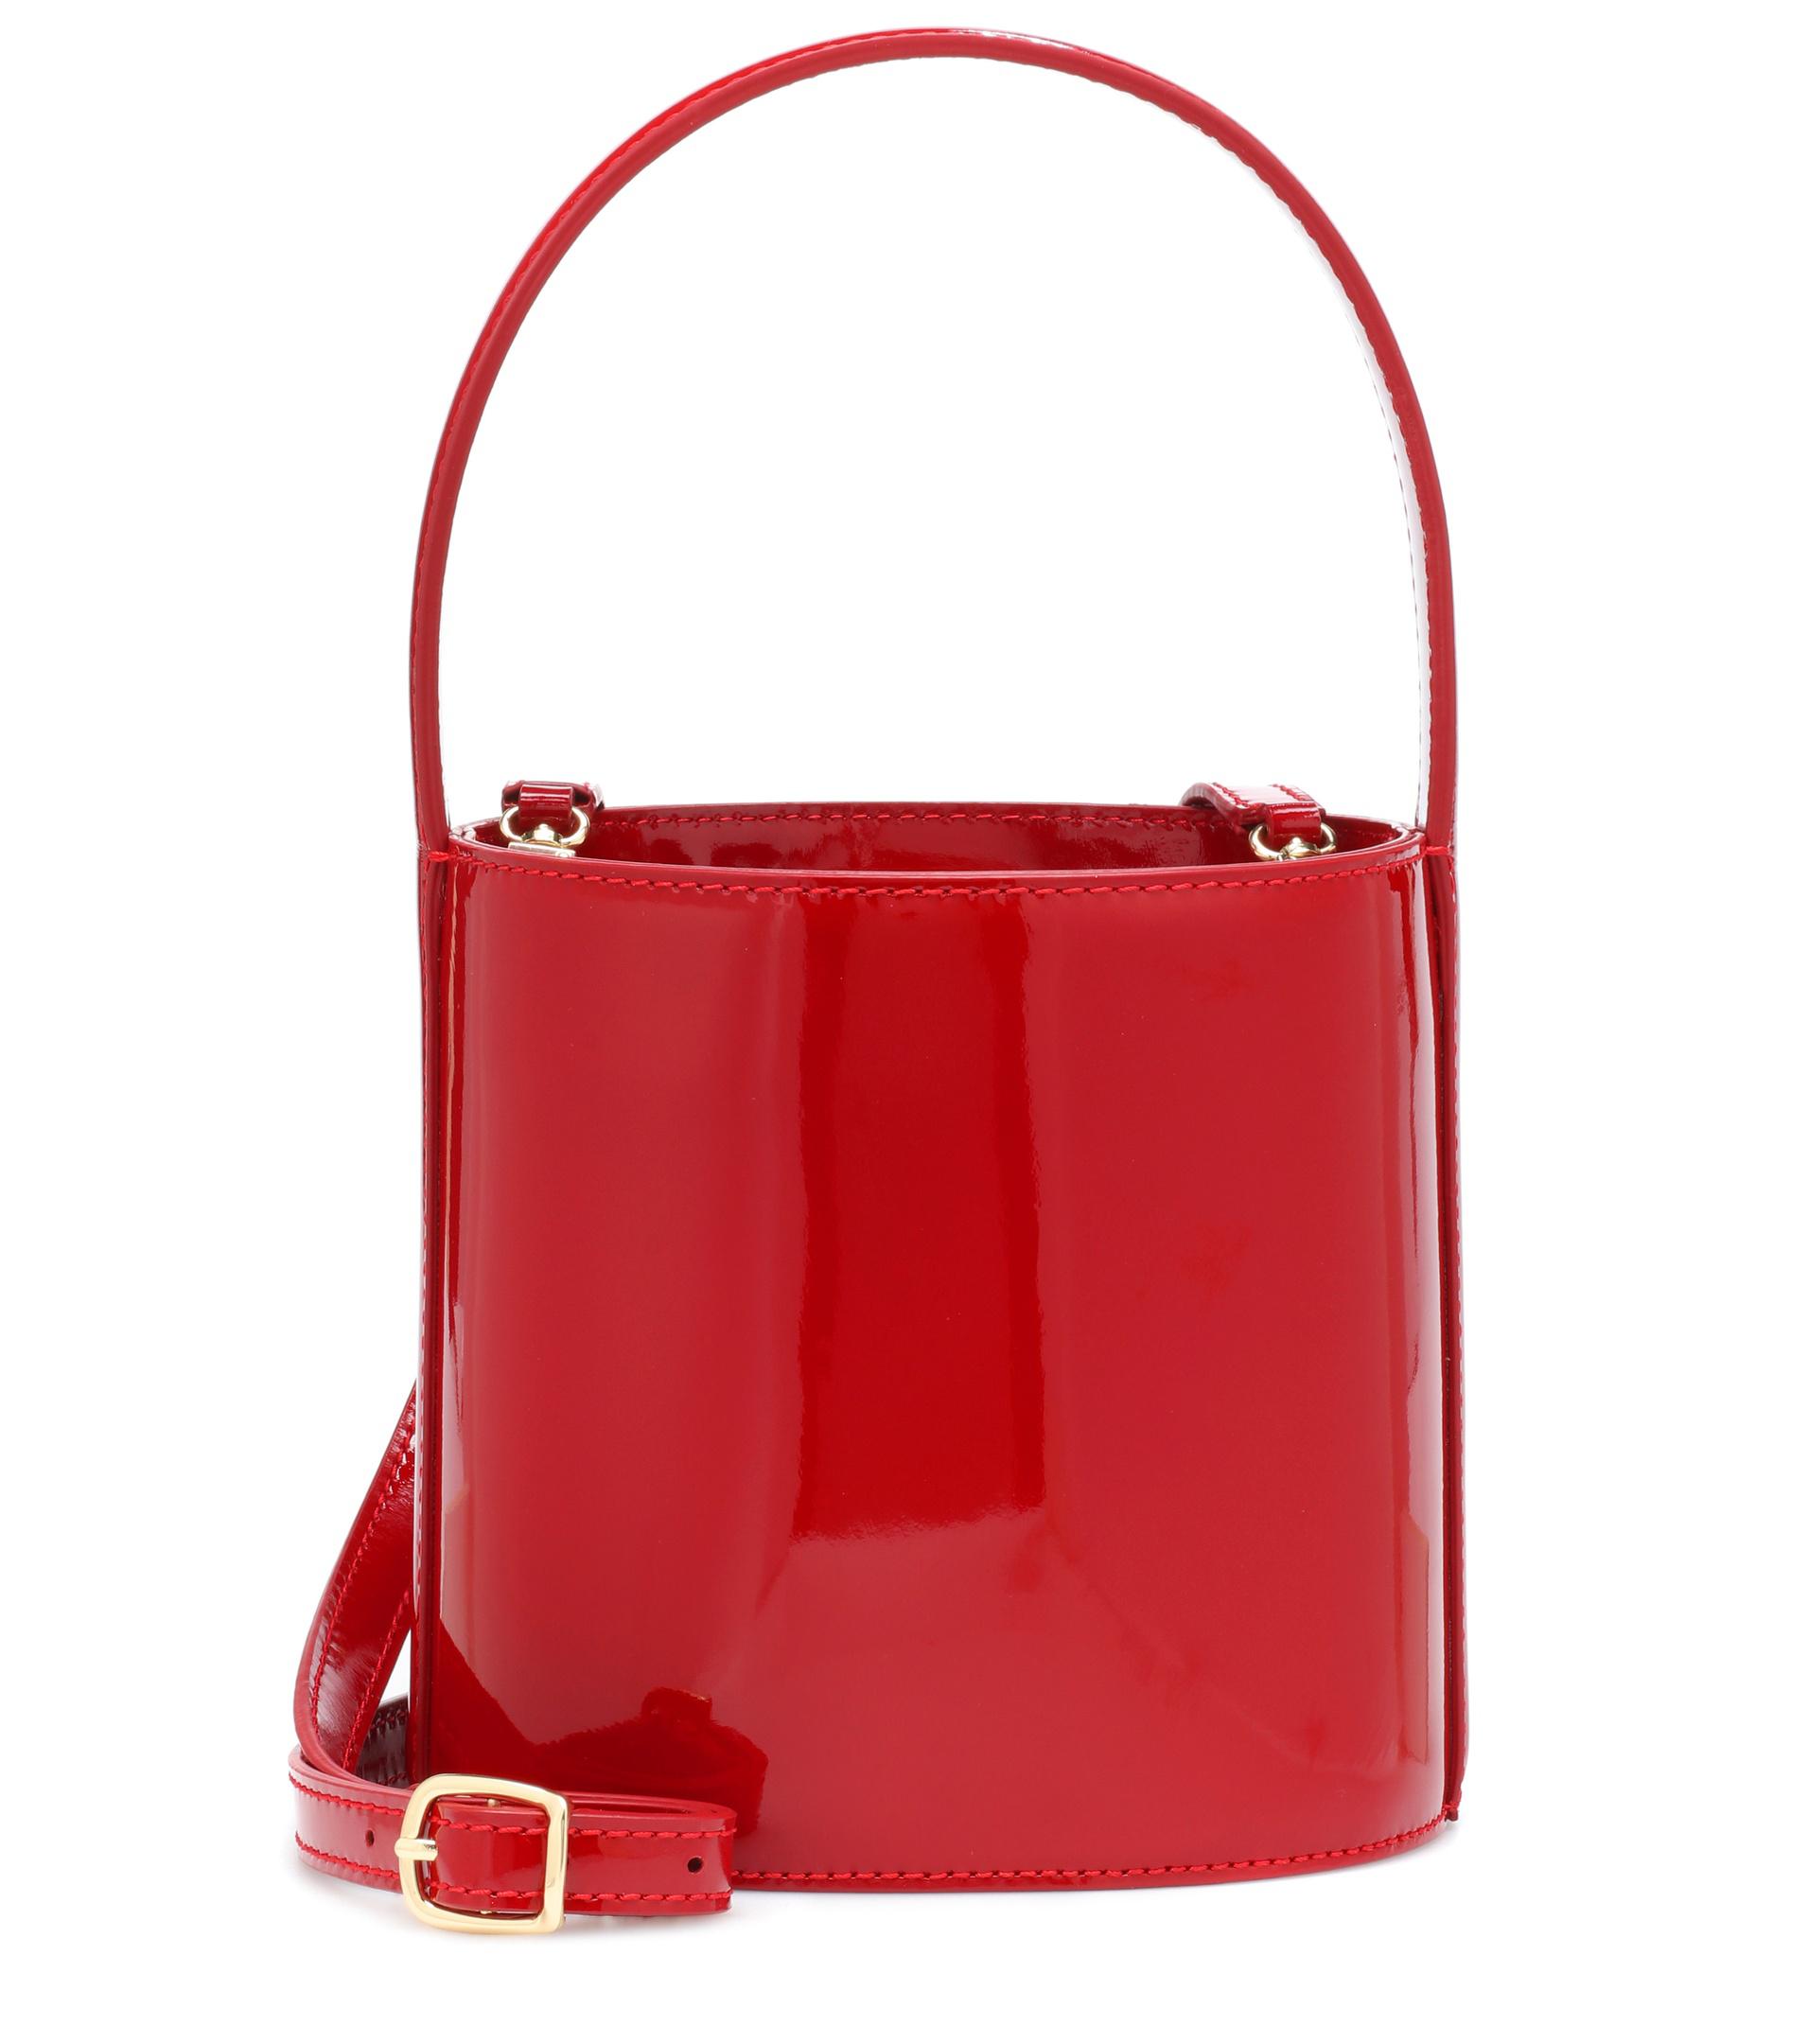 STAUD Bissett Patent Leather Bucket Bag in Red - Lyst